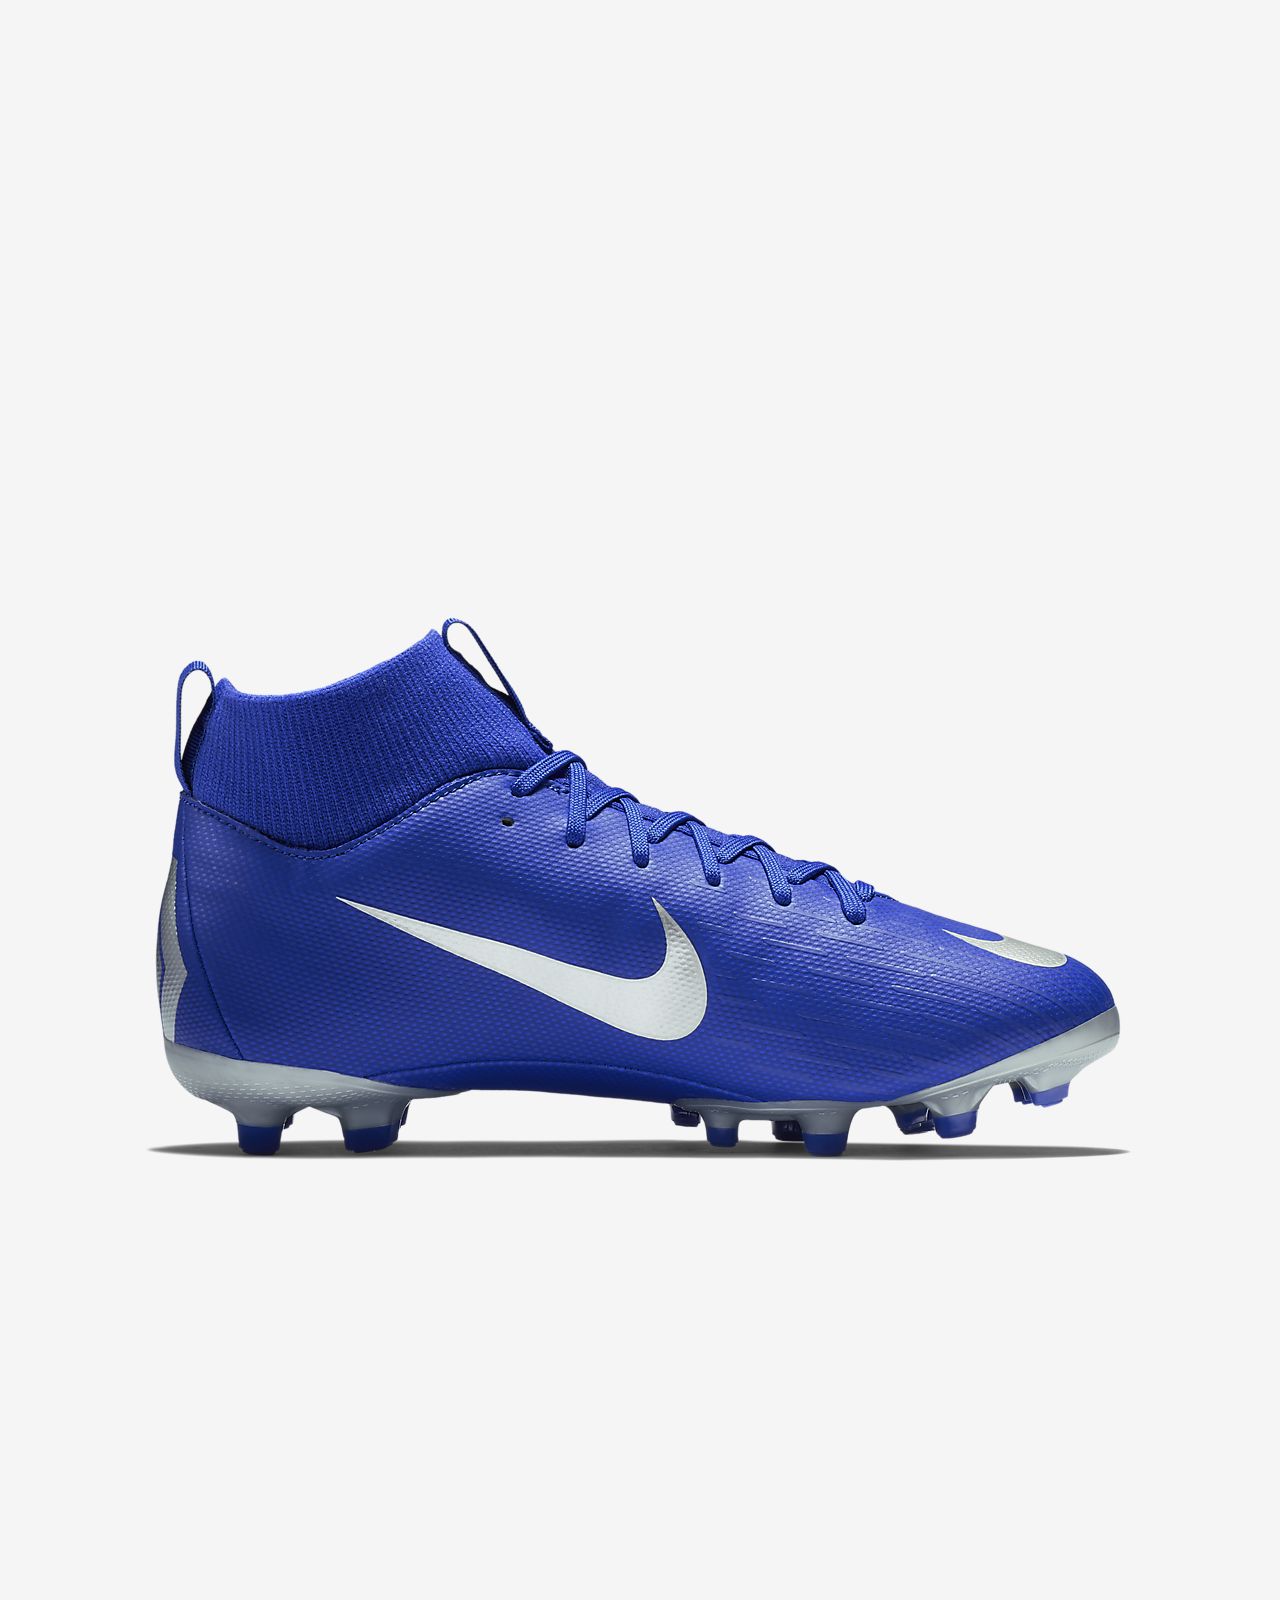 Nike Mercurial Superfly 7 Academy MDS MG Cleats Amazon.